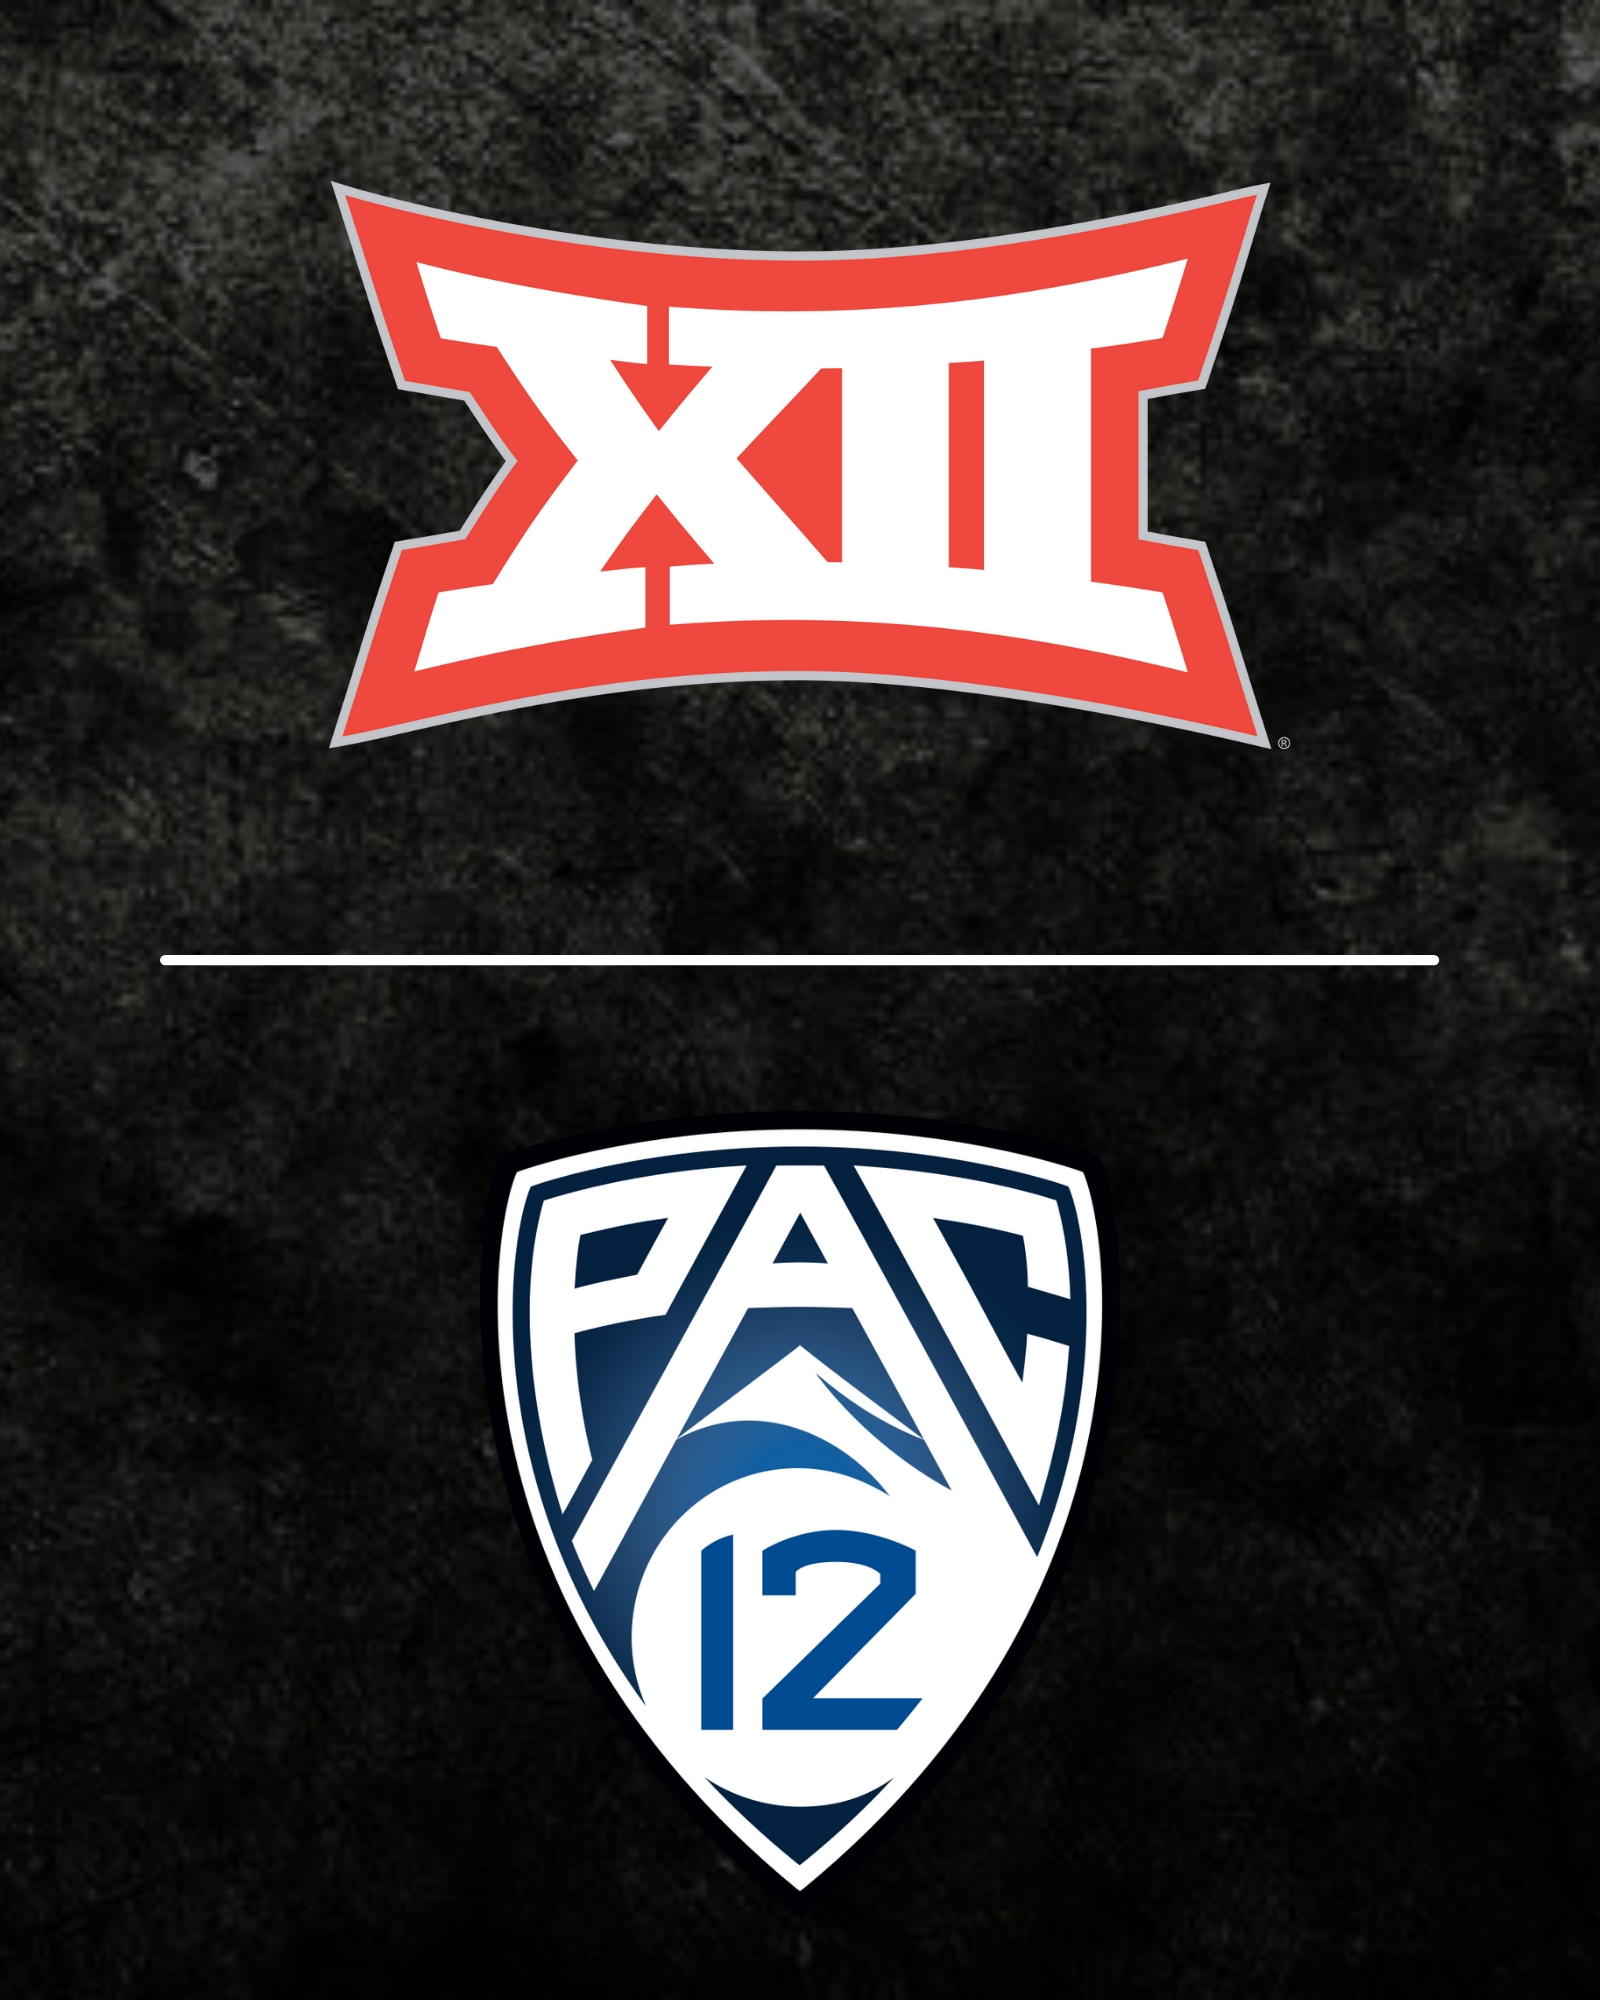 Big 12 Pac 12 cover